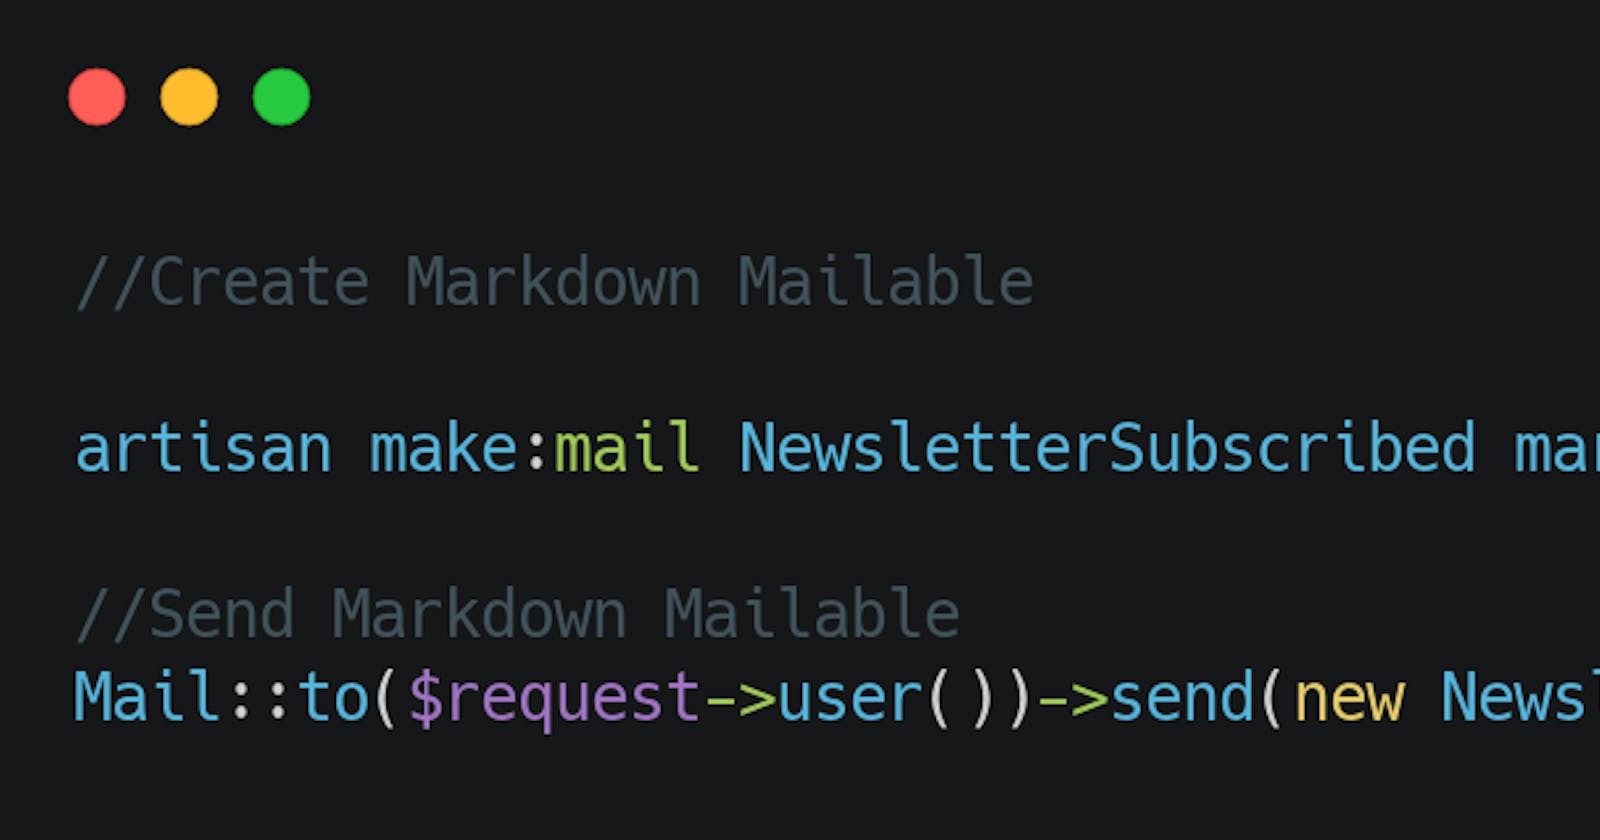 How markdown emails work in Laravel using `league/commonmark` package